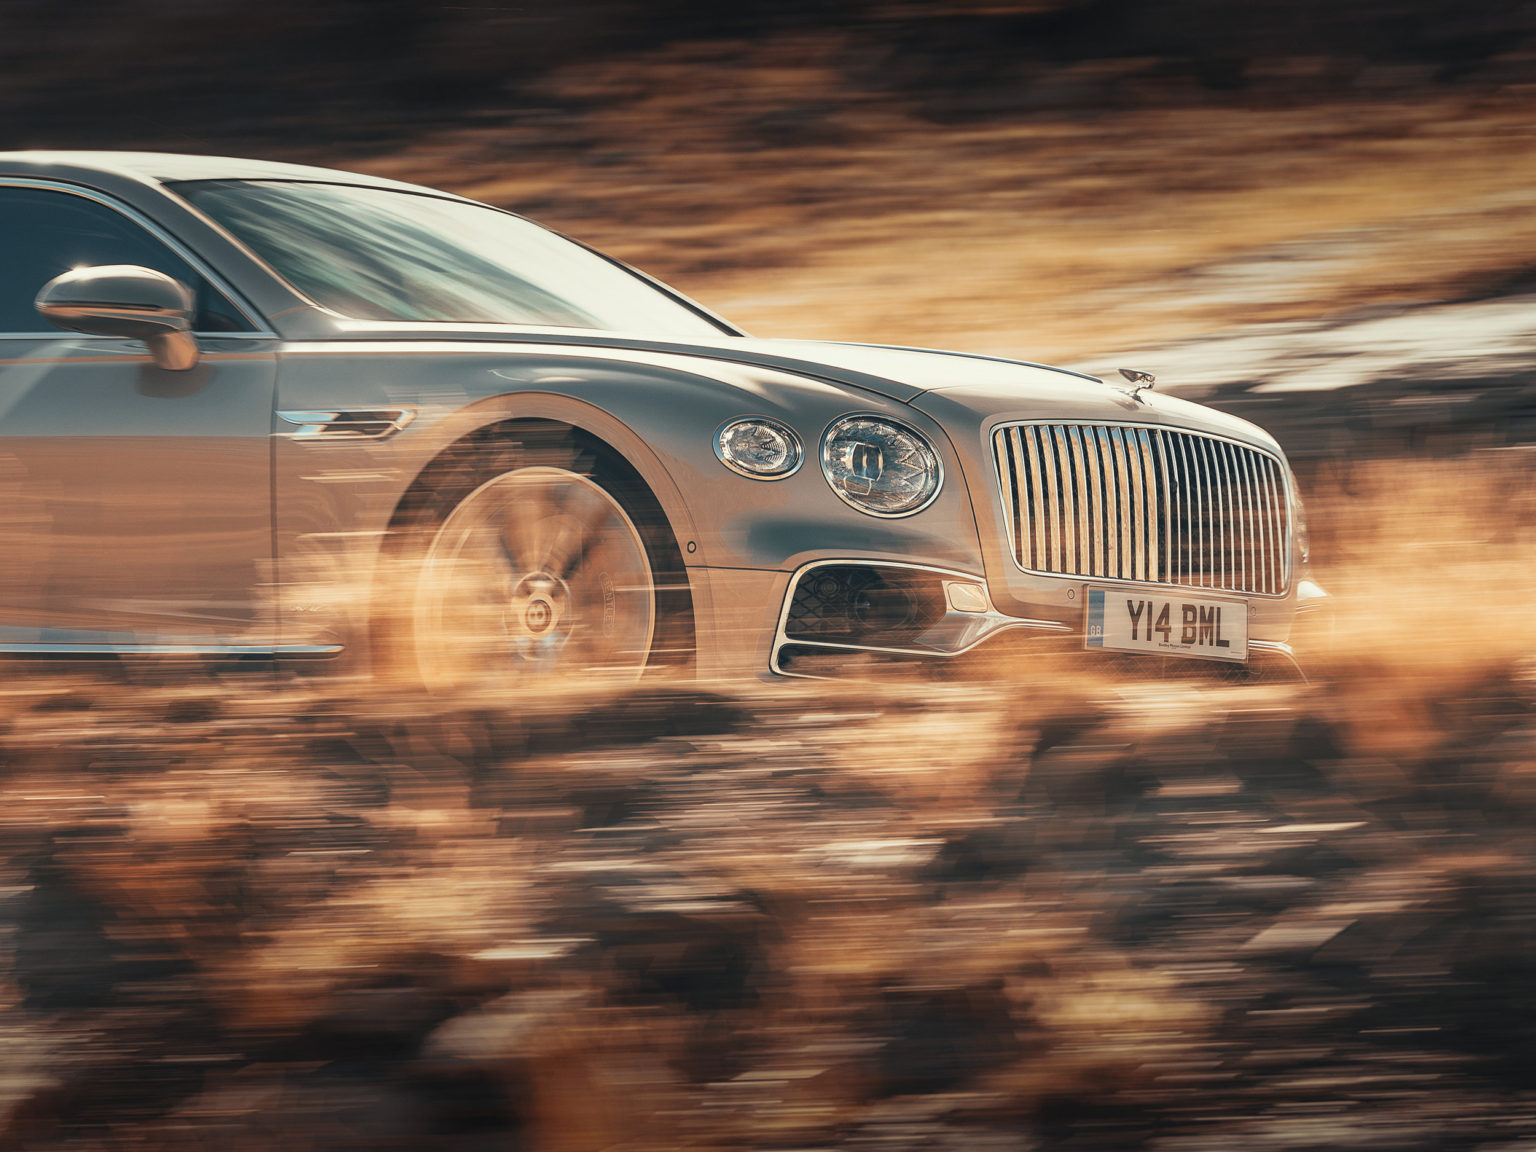 A host of exterior and interior upgrades are in order for the new Flying Spur.